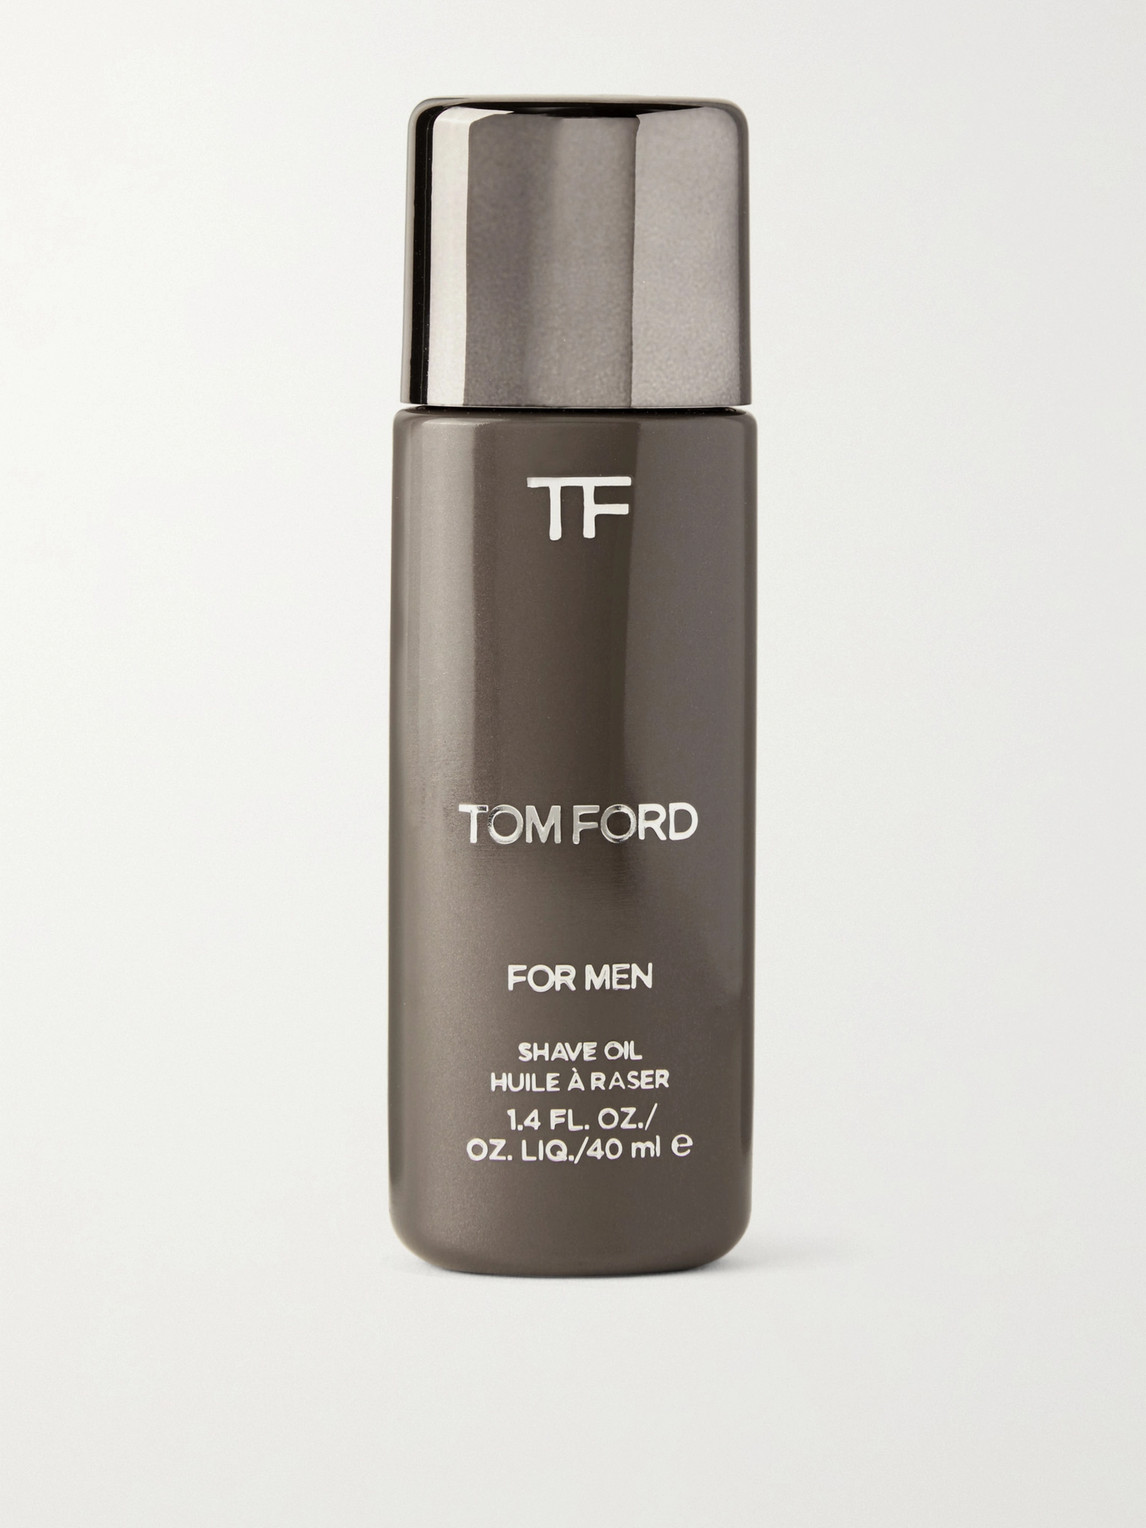 TOM FORD SHAVE OIL, 40ML